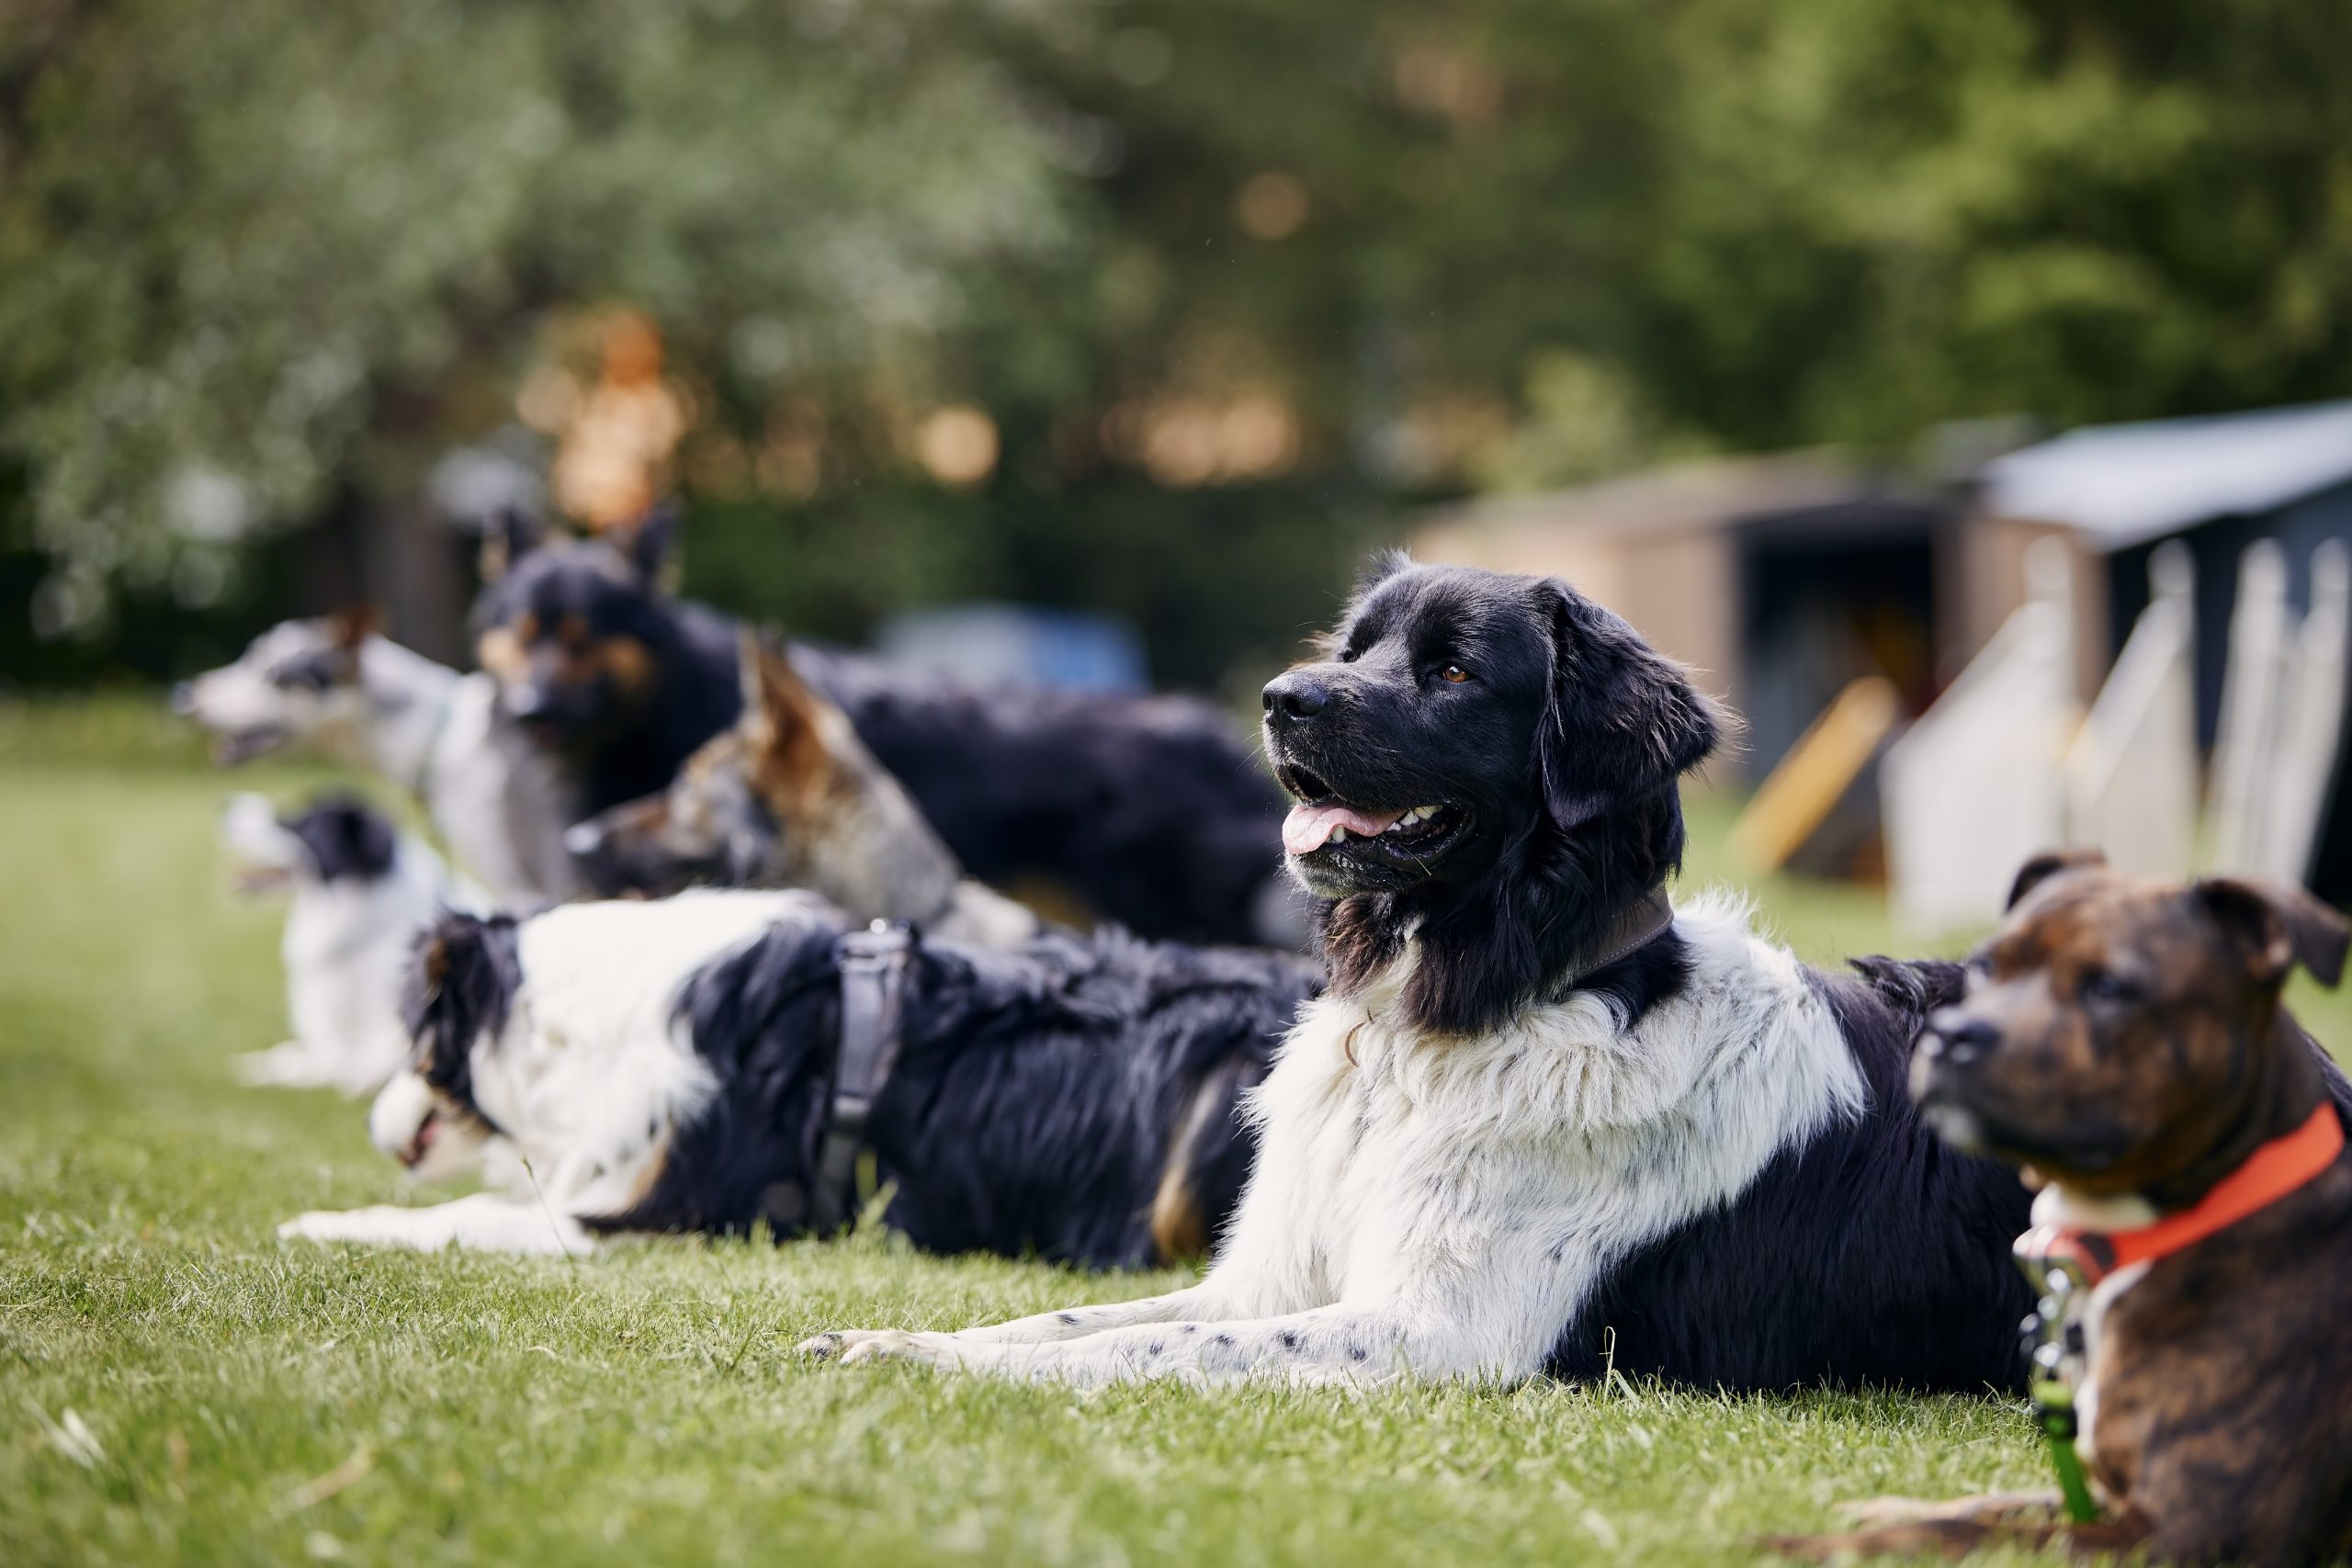 The Top 5 Dog Training Classes in Your Area